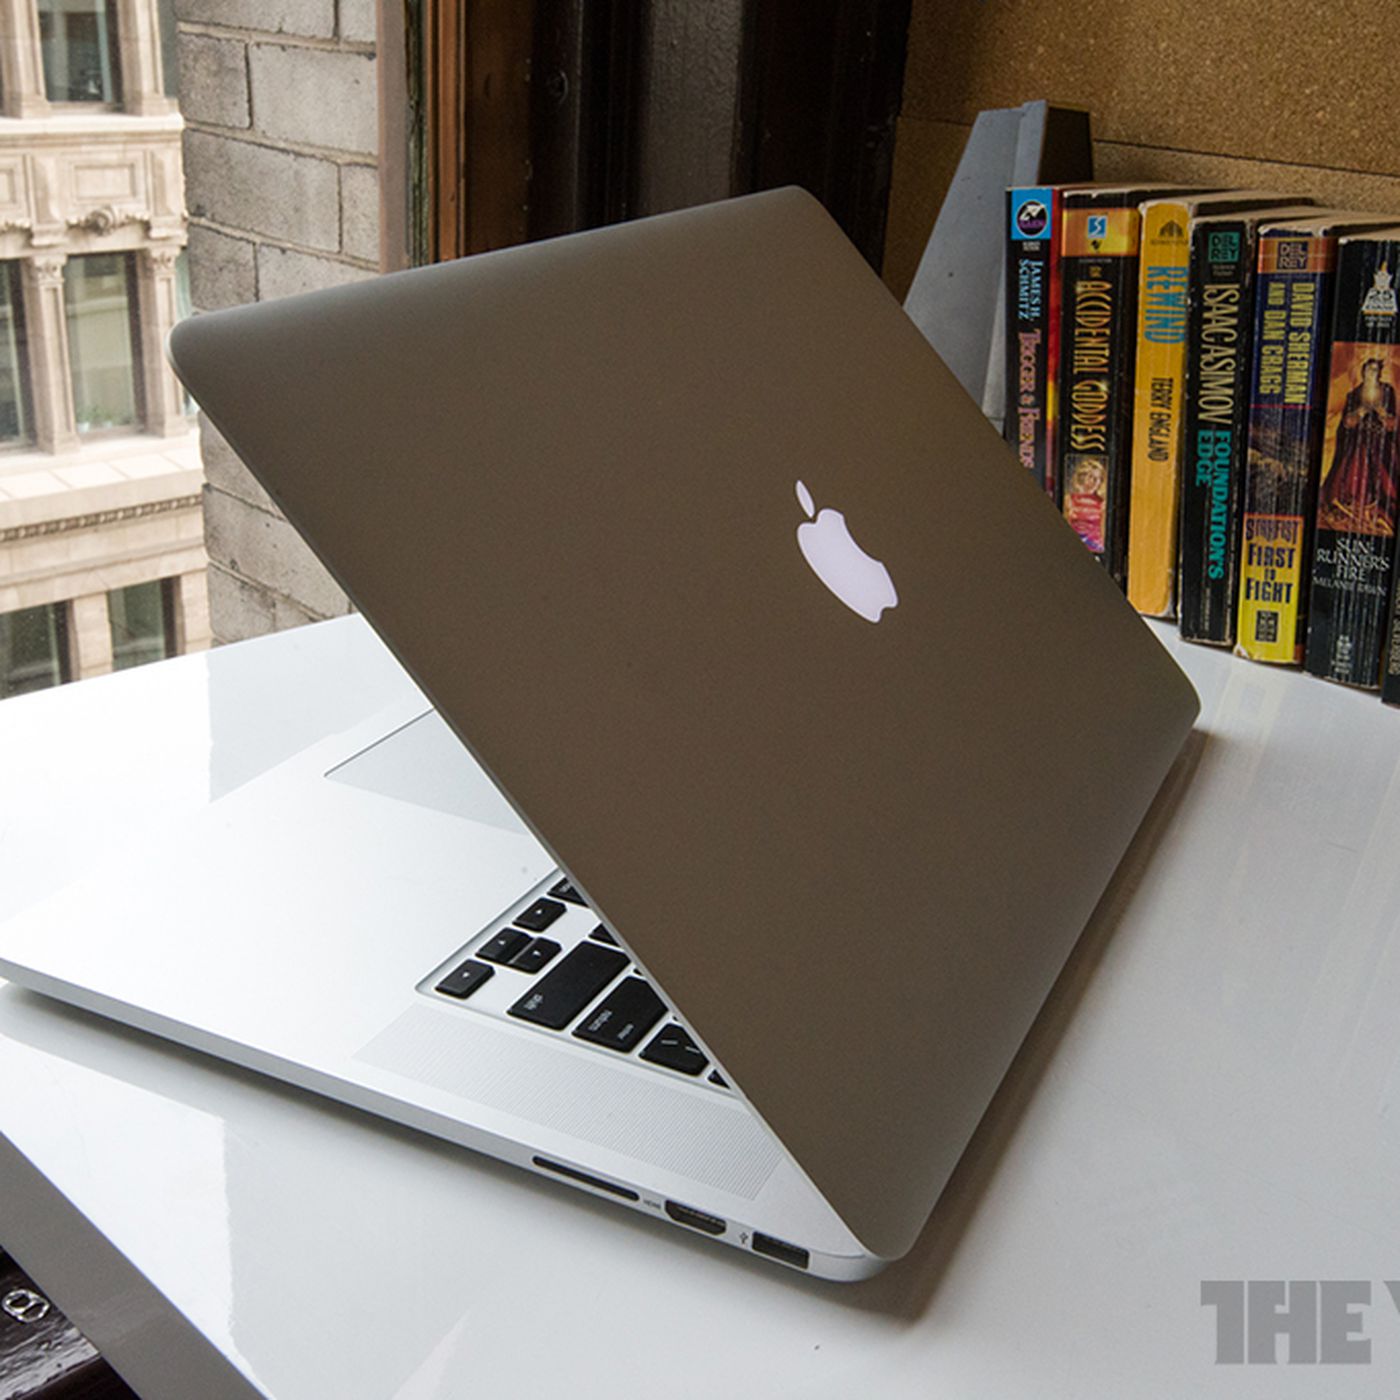 Does a Bad Battery Affect Macbook Performance 